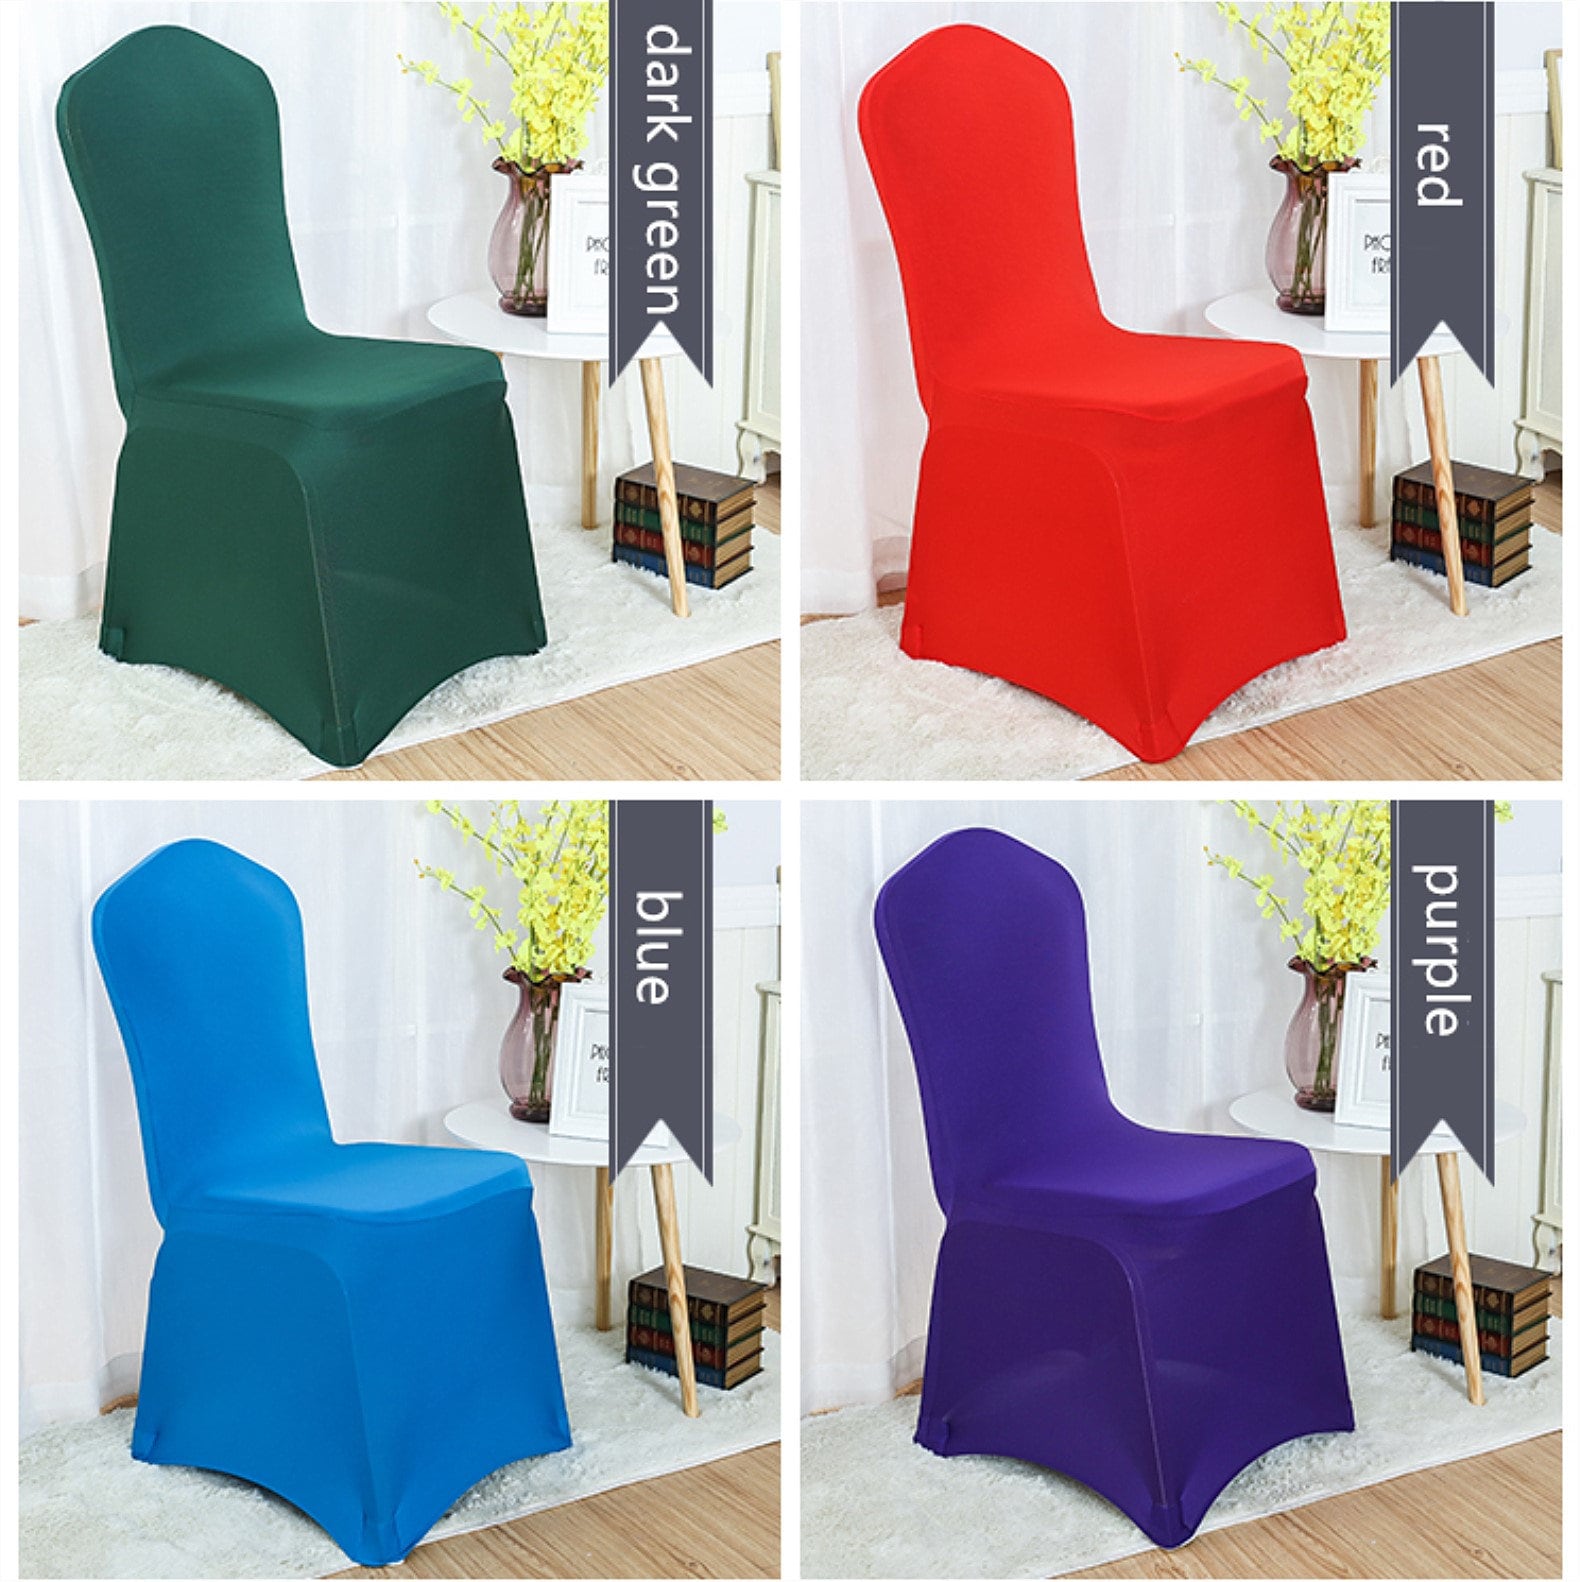 50/100Pcs Chair Covers Spandex Lycra Wedding Banquet Anniversary Party Decor NEW 